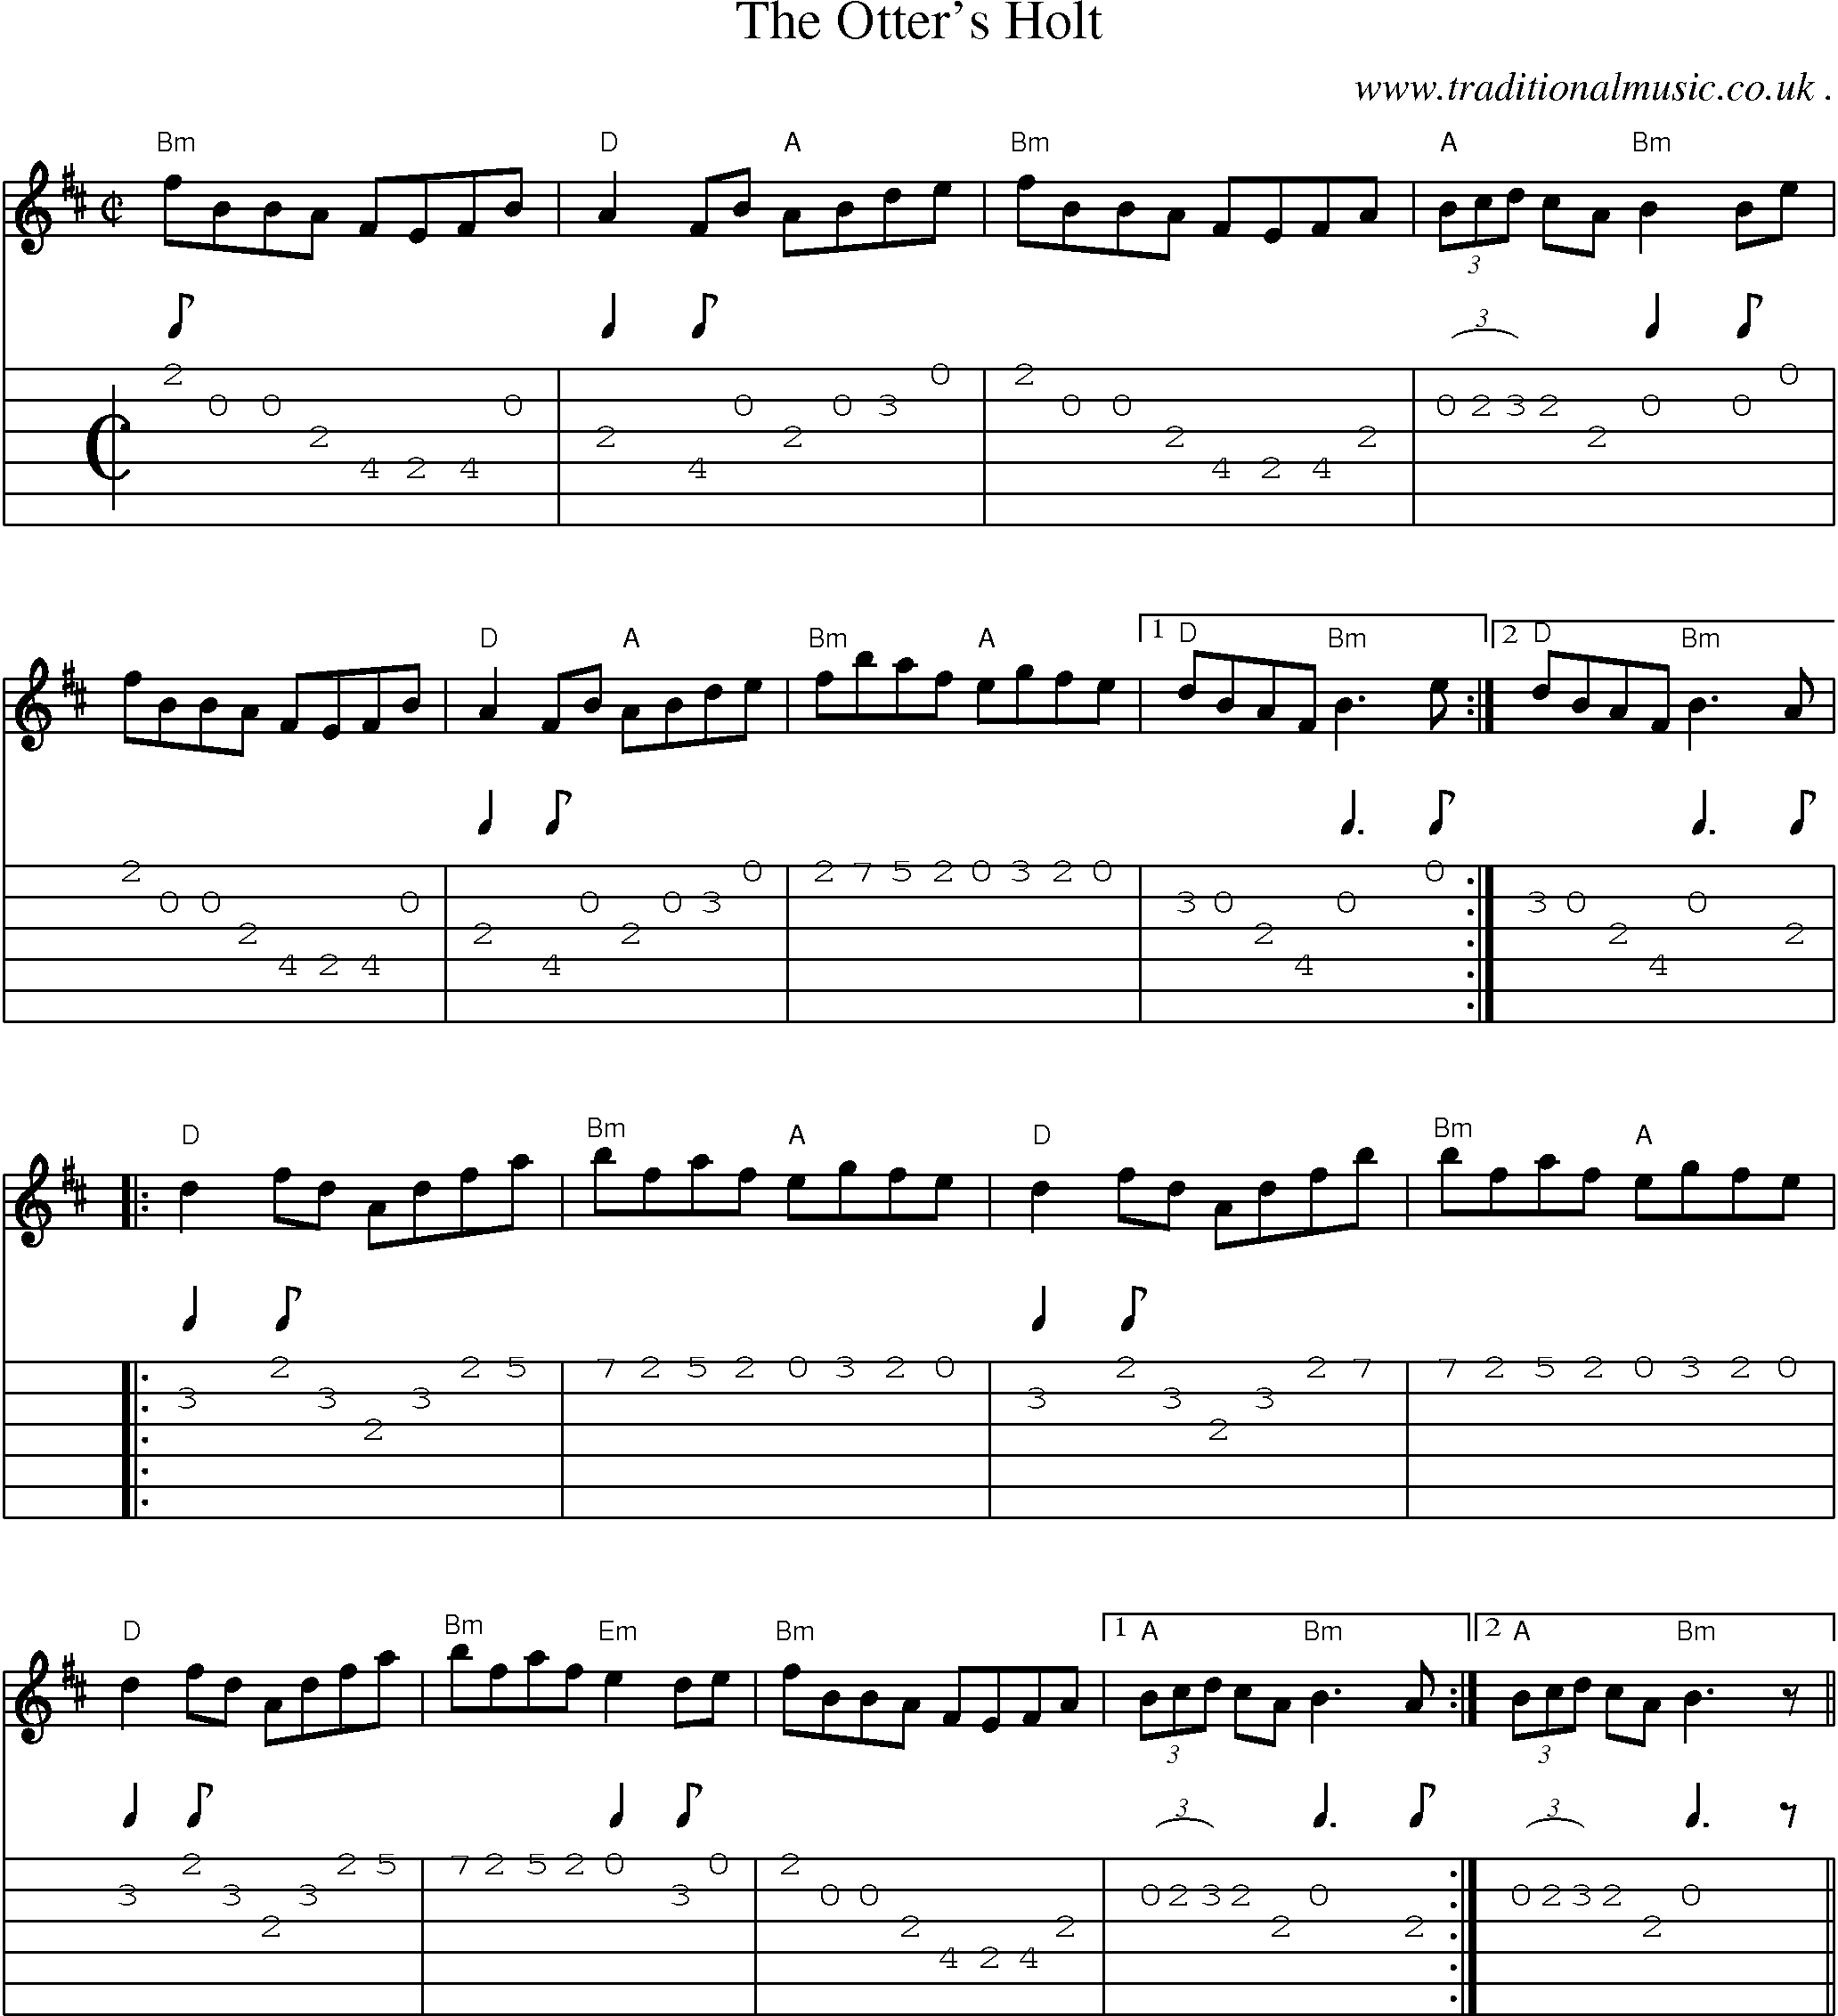 Music Score and Guitar Tabs for The Otters Holt